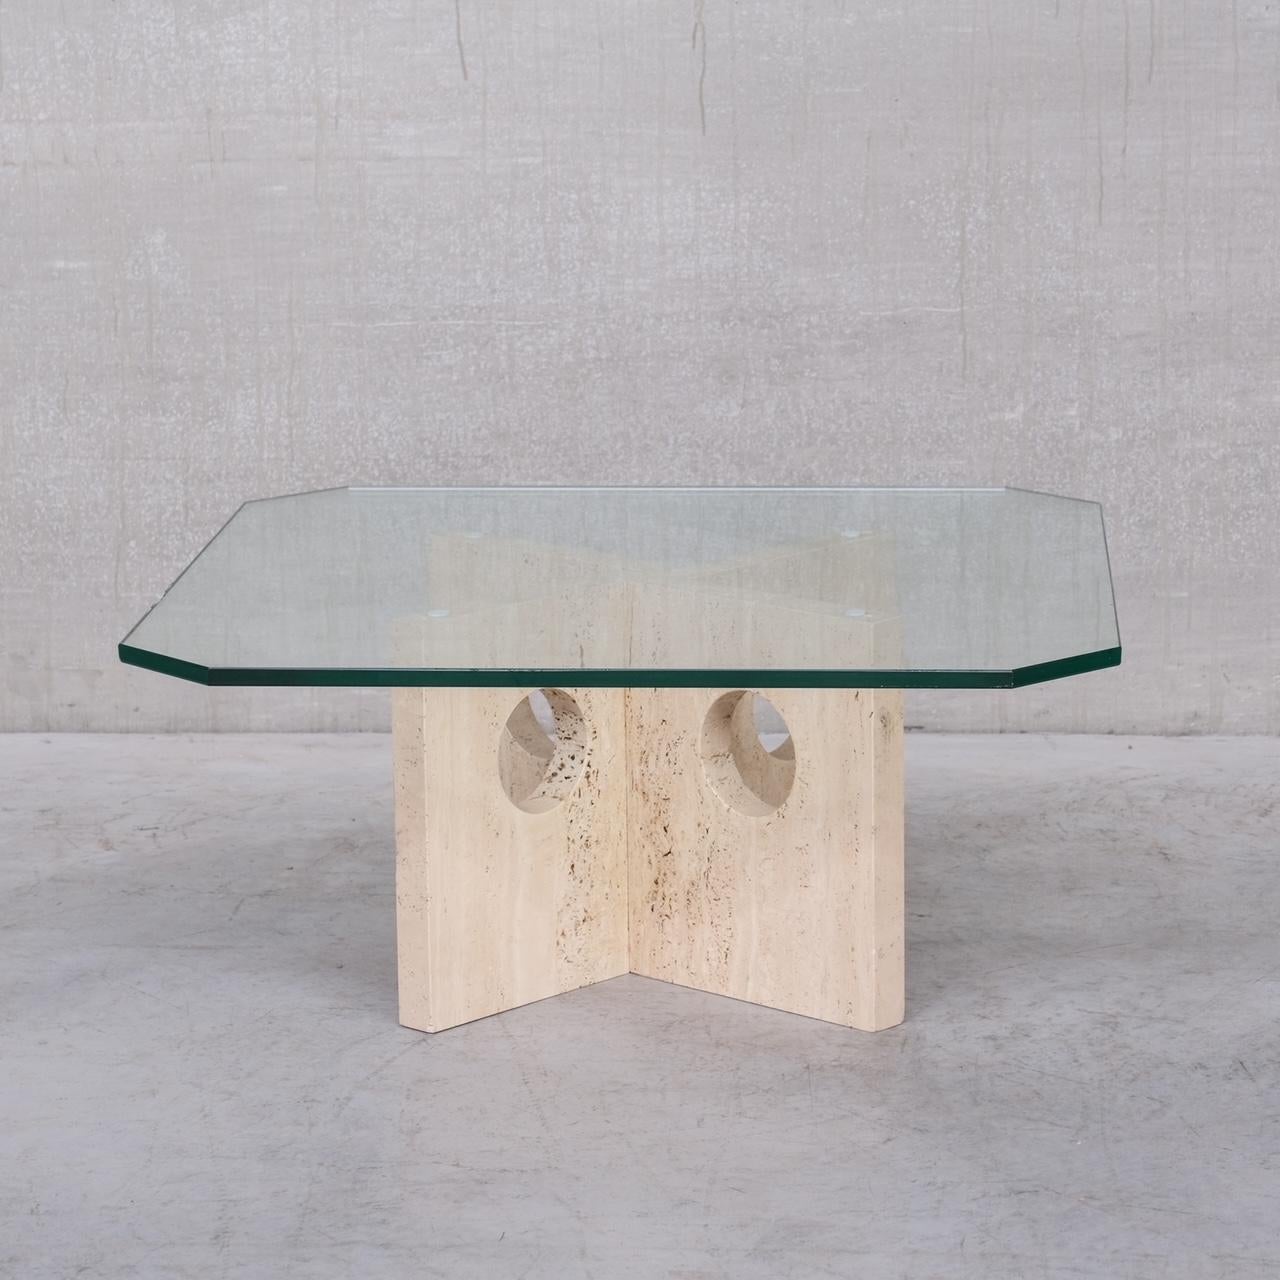 A travertine based coffee table with a glass top. 

Italy, c1970s. 

Likely by Up&Up, Italy. 

The travertine has circular recesses. 

Good vintage condition. 

Location: Belgium Gallery. 

Dimensions: 45 H x 100 W x 100 D in cm.

Delivery: POA

We